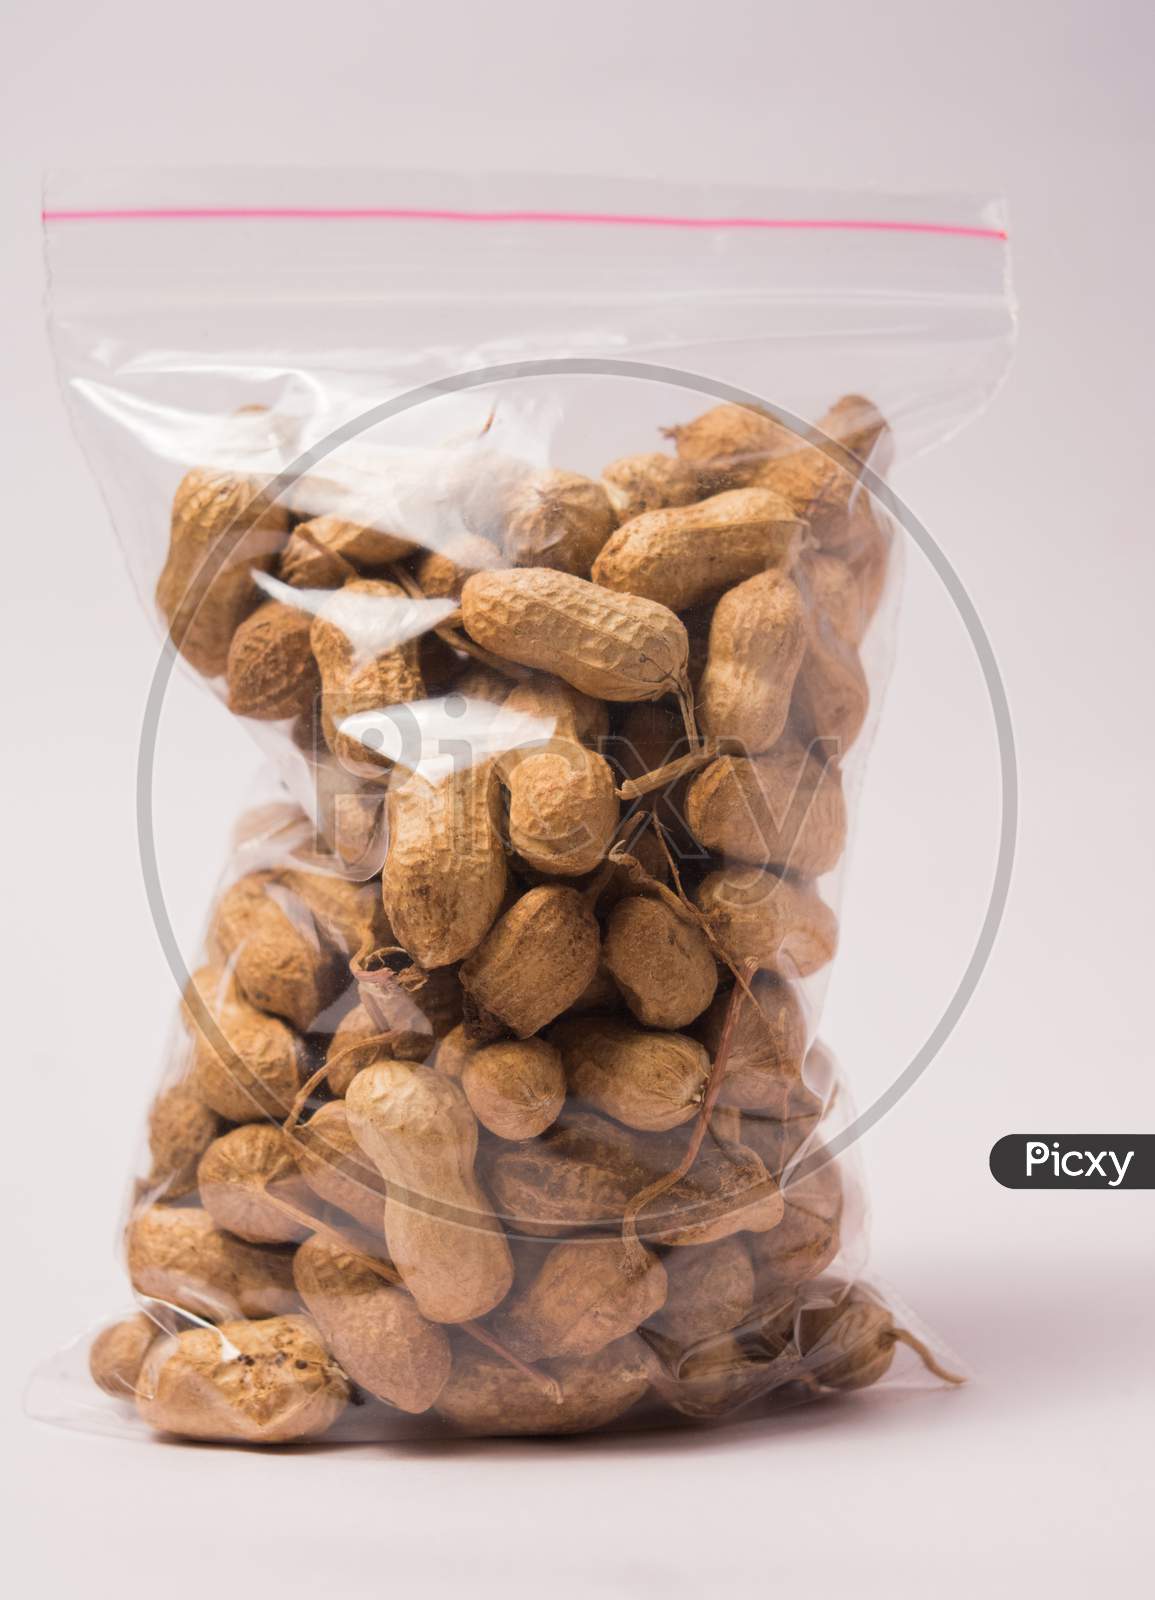 Groundnuts Packed In Plastic Bag On Isloated Background